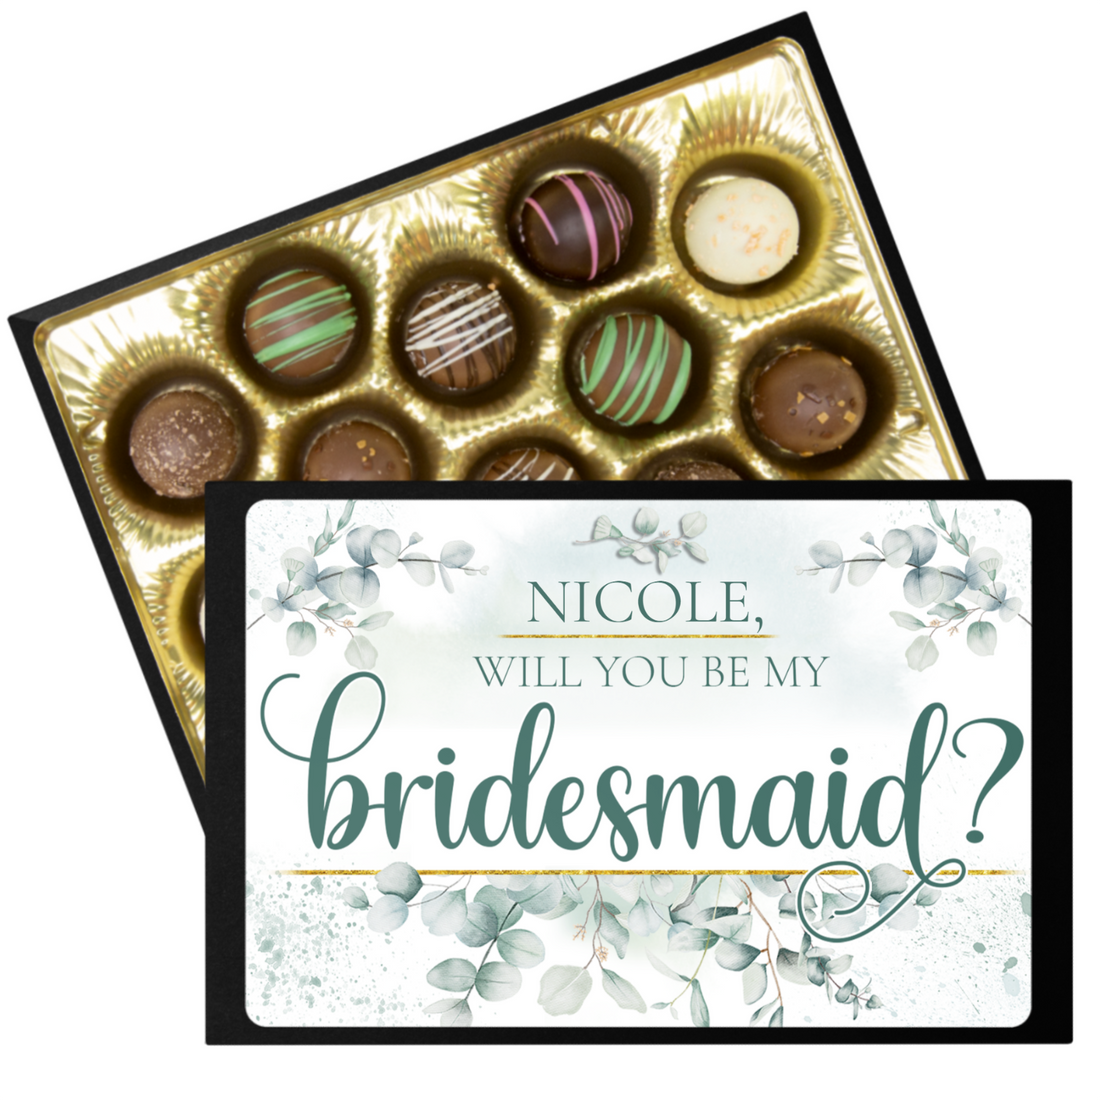 Personalized Will You Be My Bridesmaid Chocolate Box - Handmade Chocolate Truffles - Gift for Bridesmaid - Customized Chocolate Gift